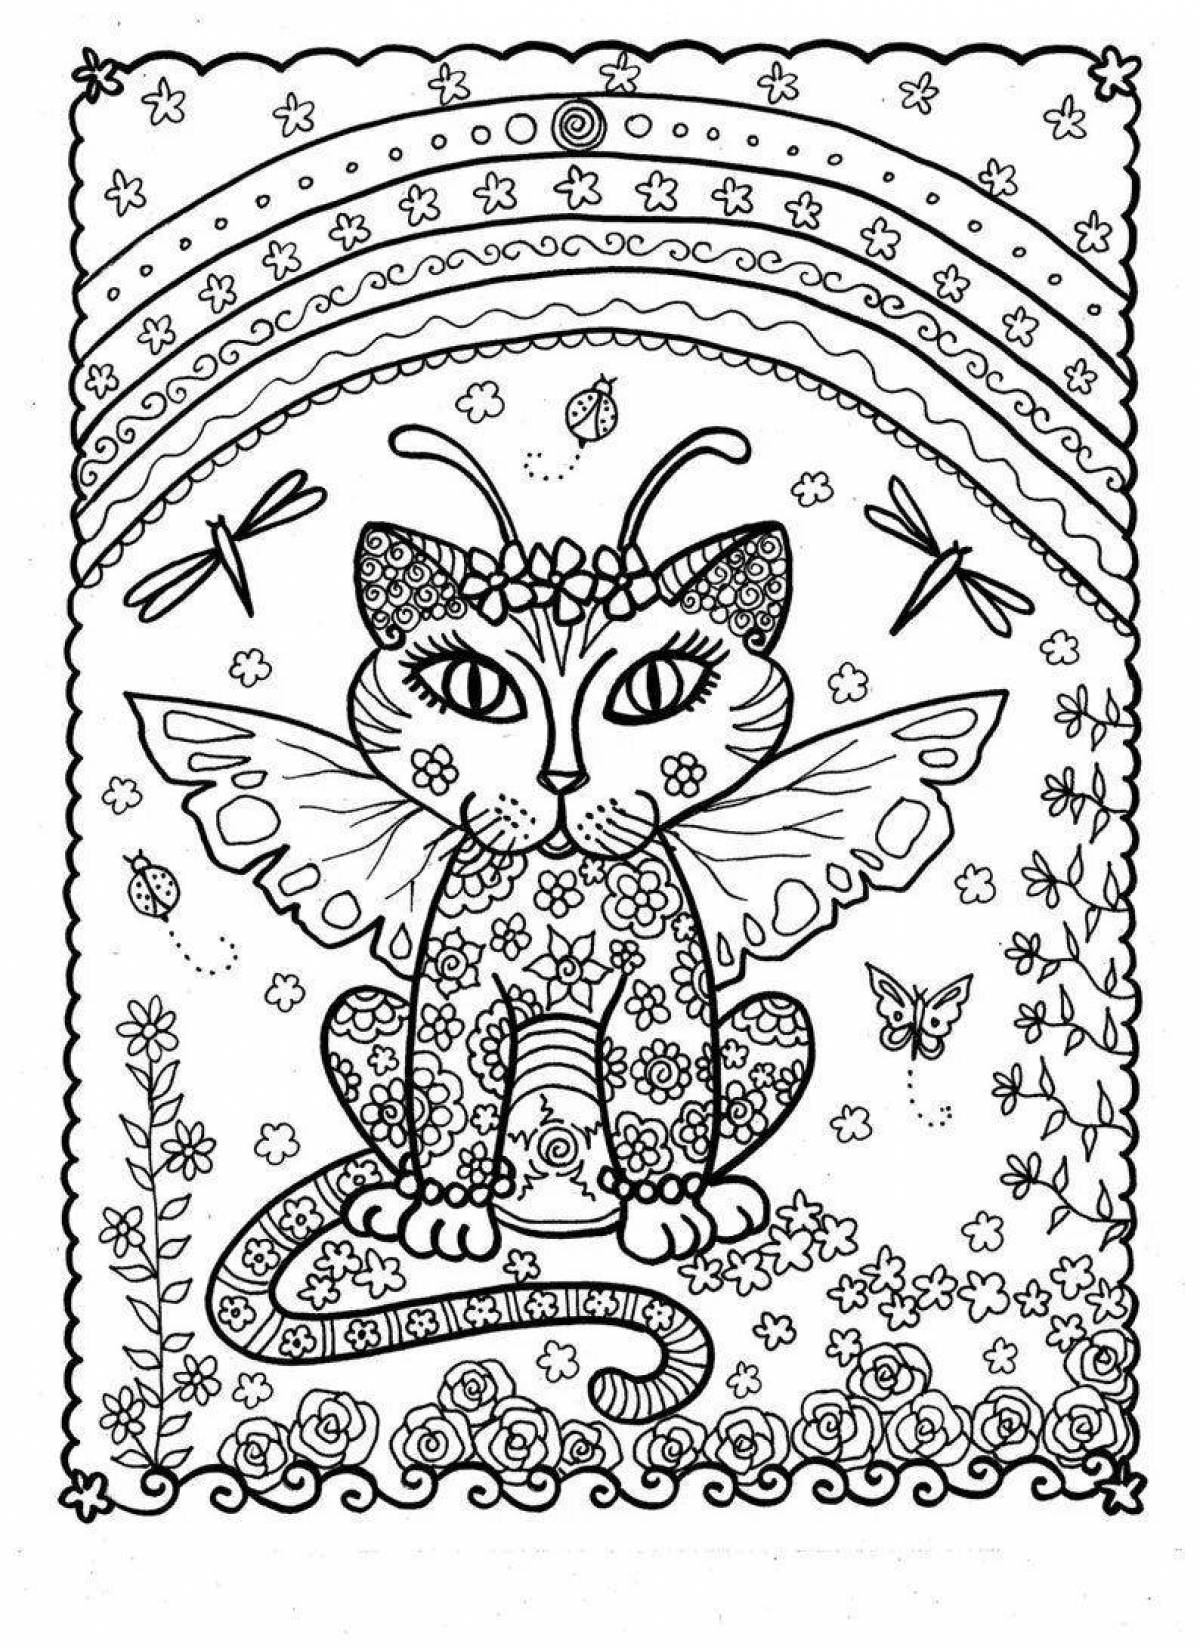 Coloring page adorable rainbow kitten